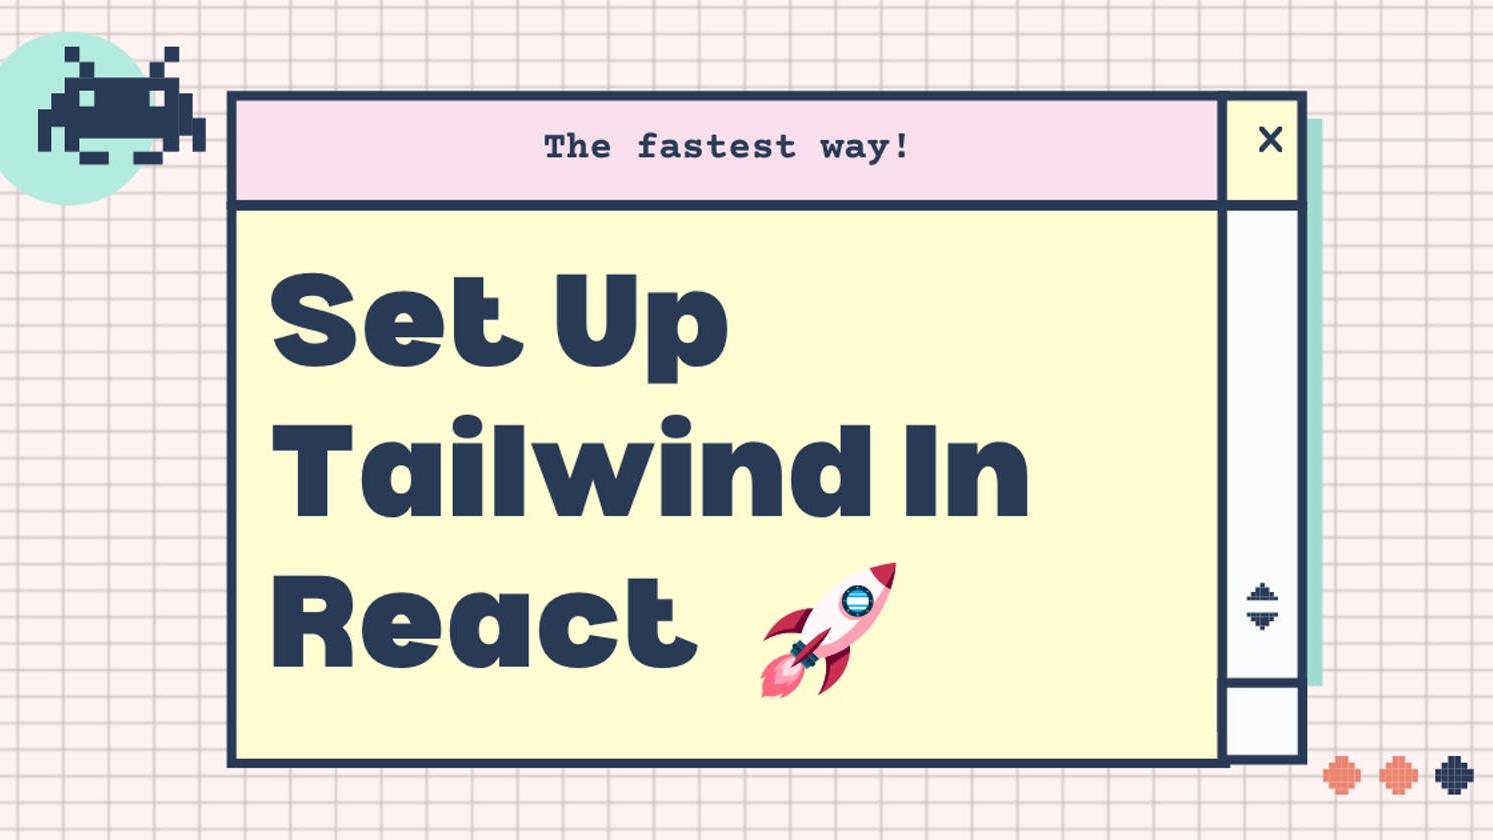 Set Up Tailwind In React - The fastest way! 🚀